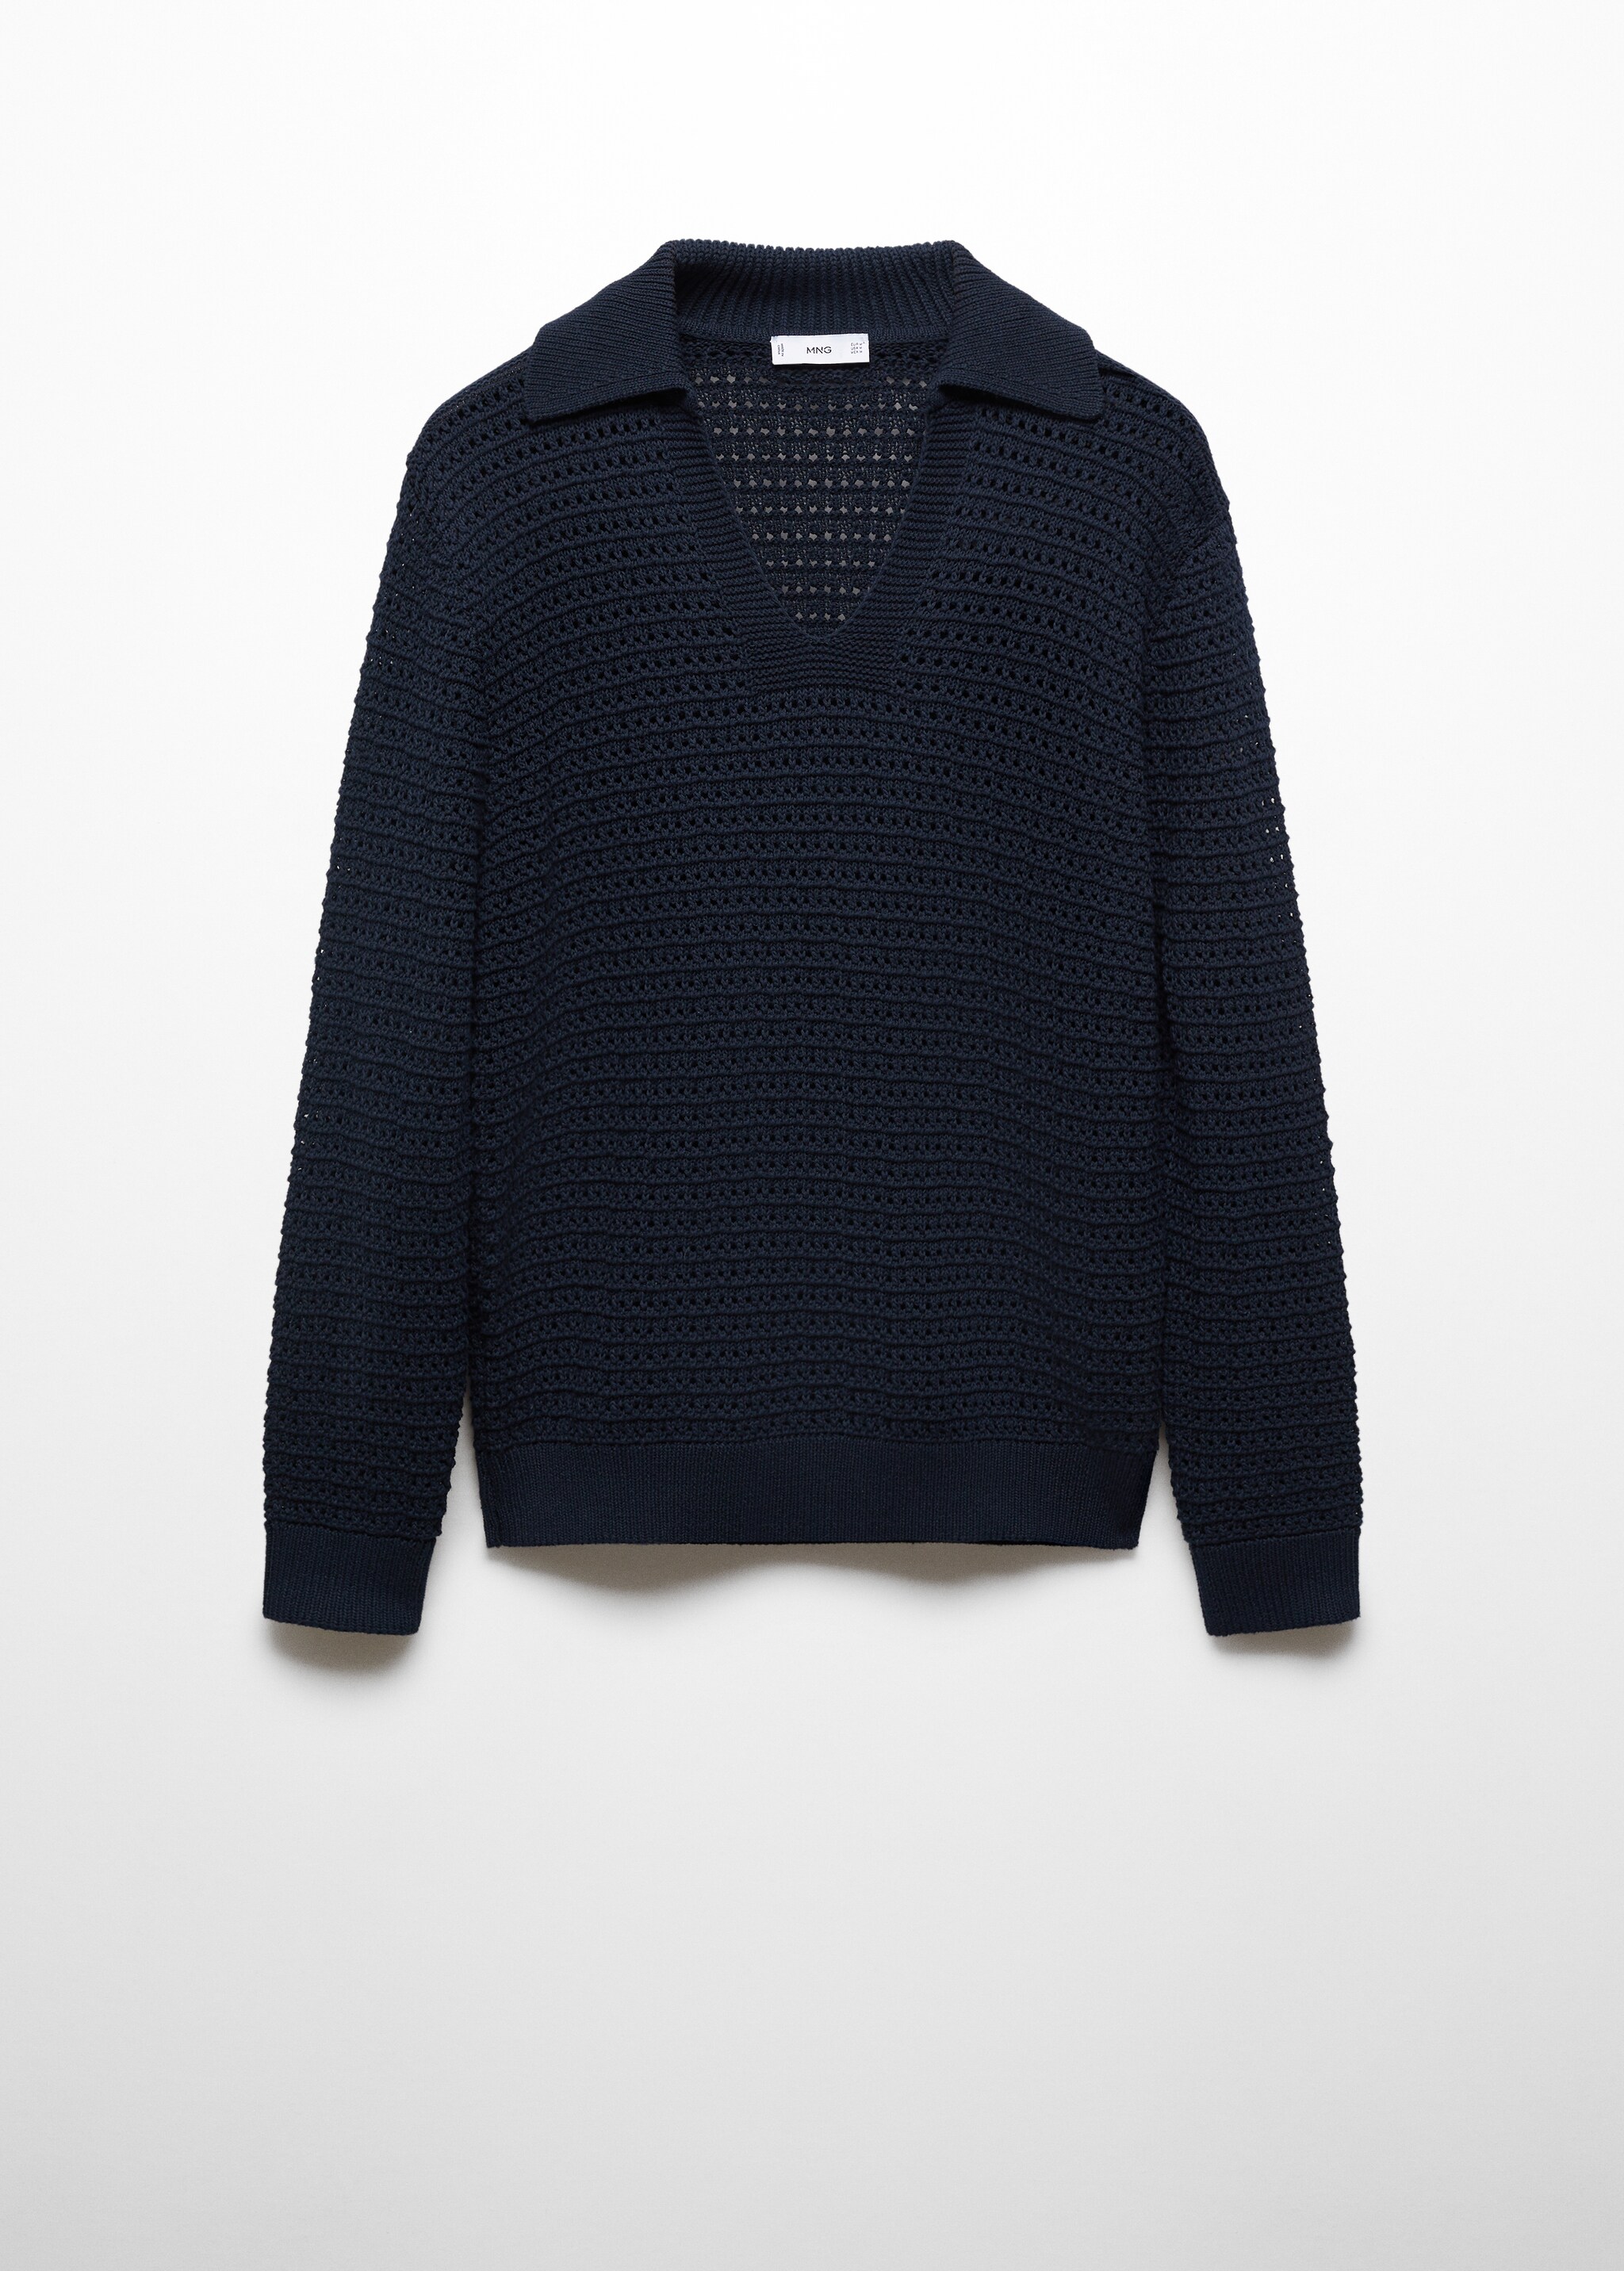 Openwork knit polo neck sweater - Article without model